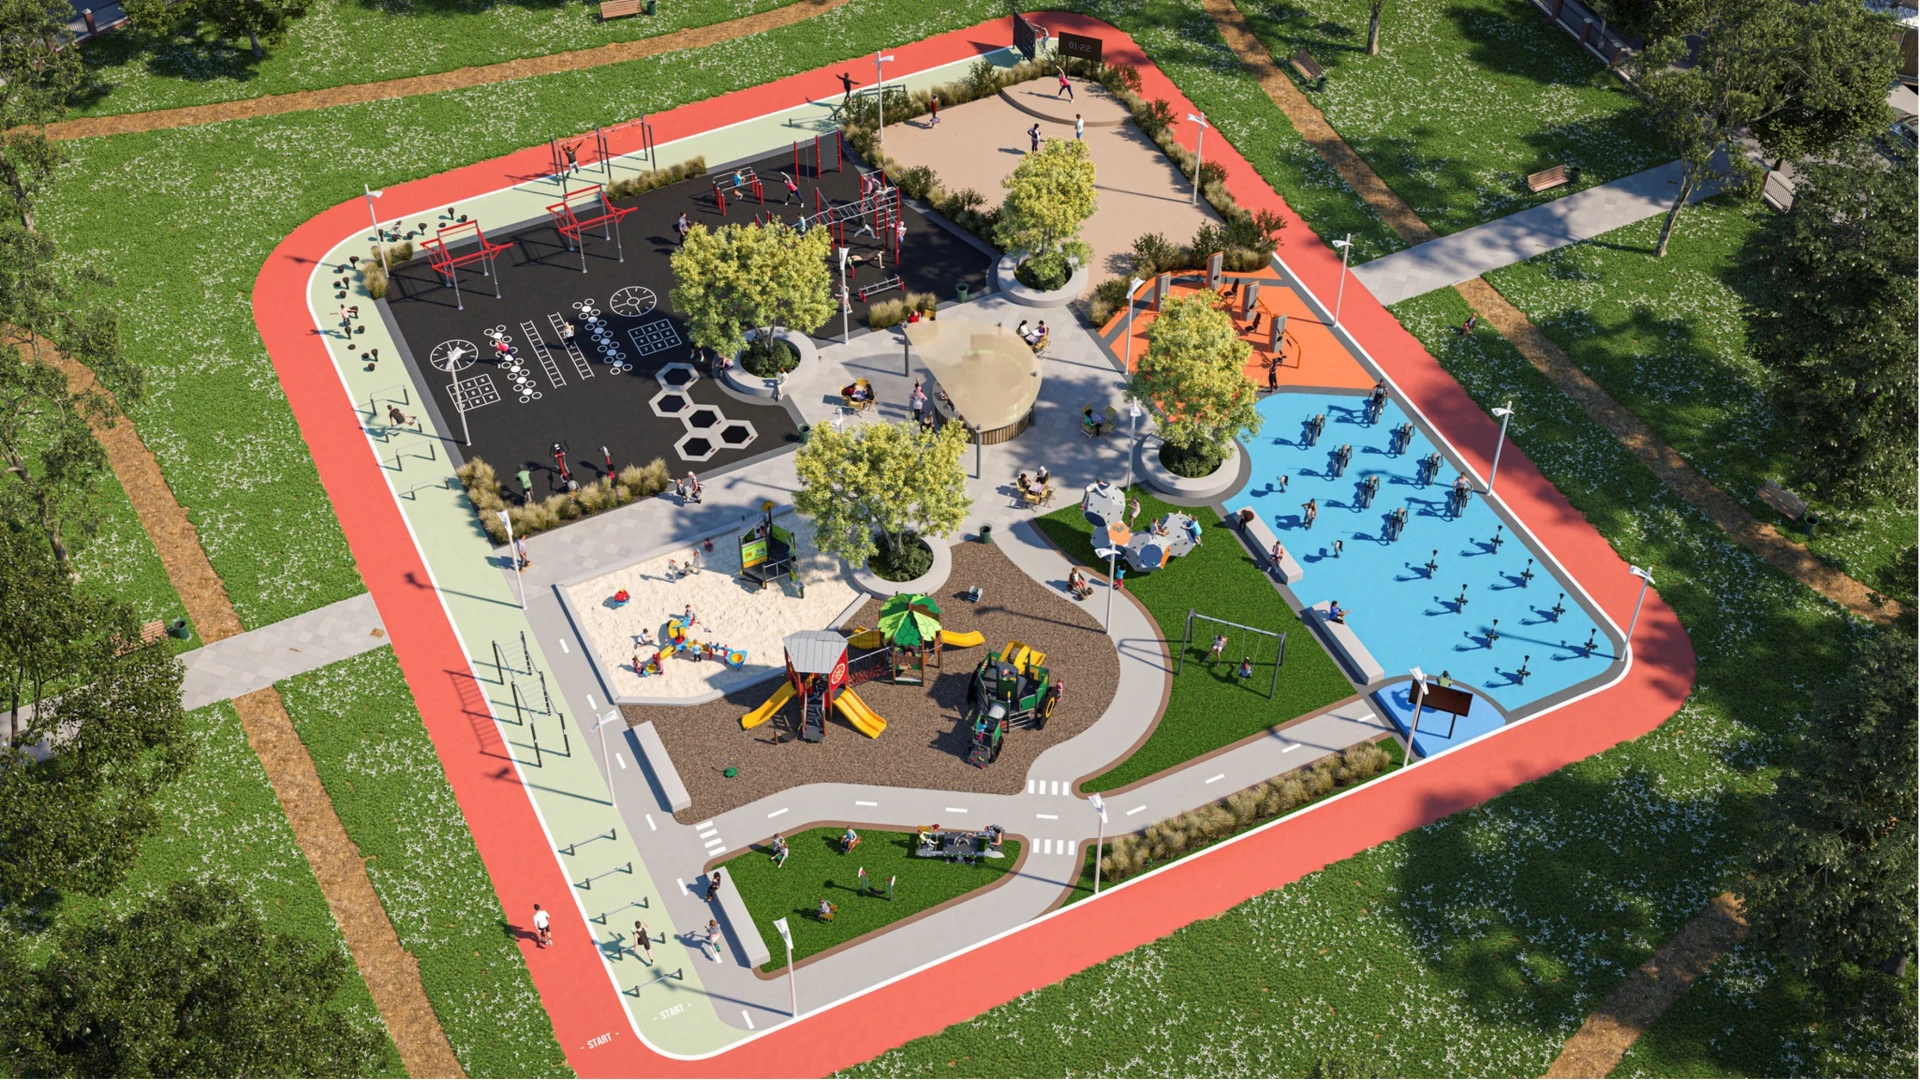 An aerial view of a playground and outdoor fitness site in a park.